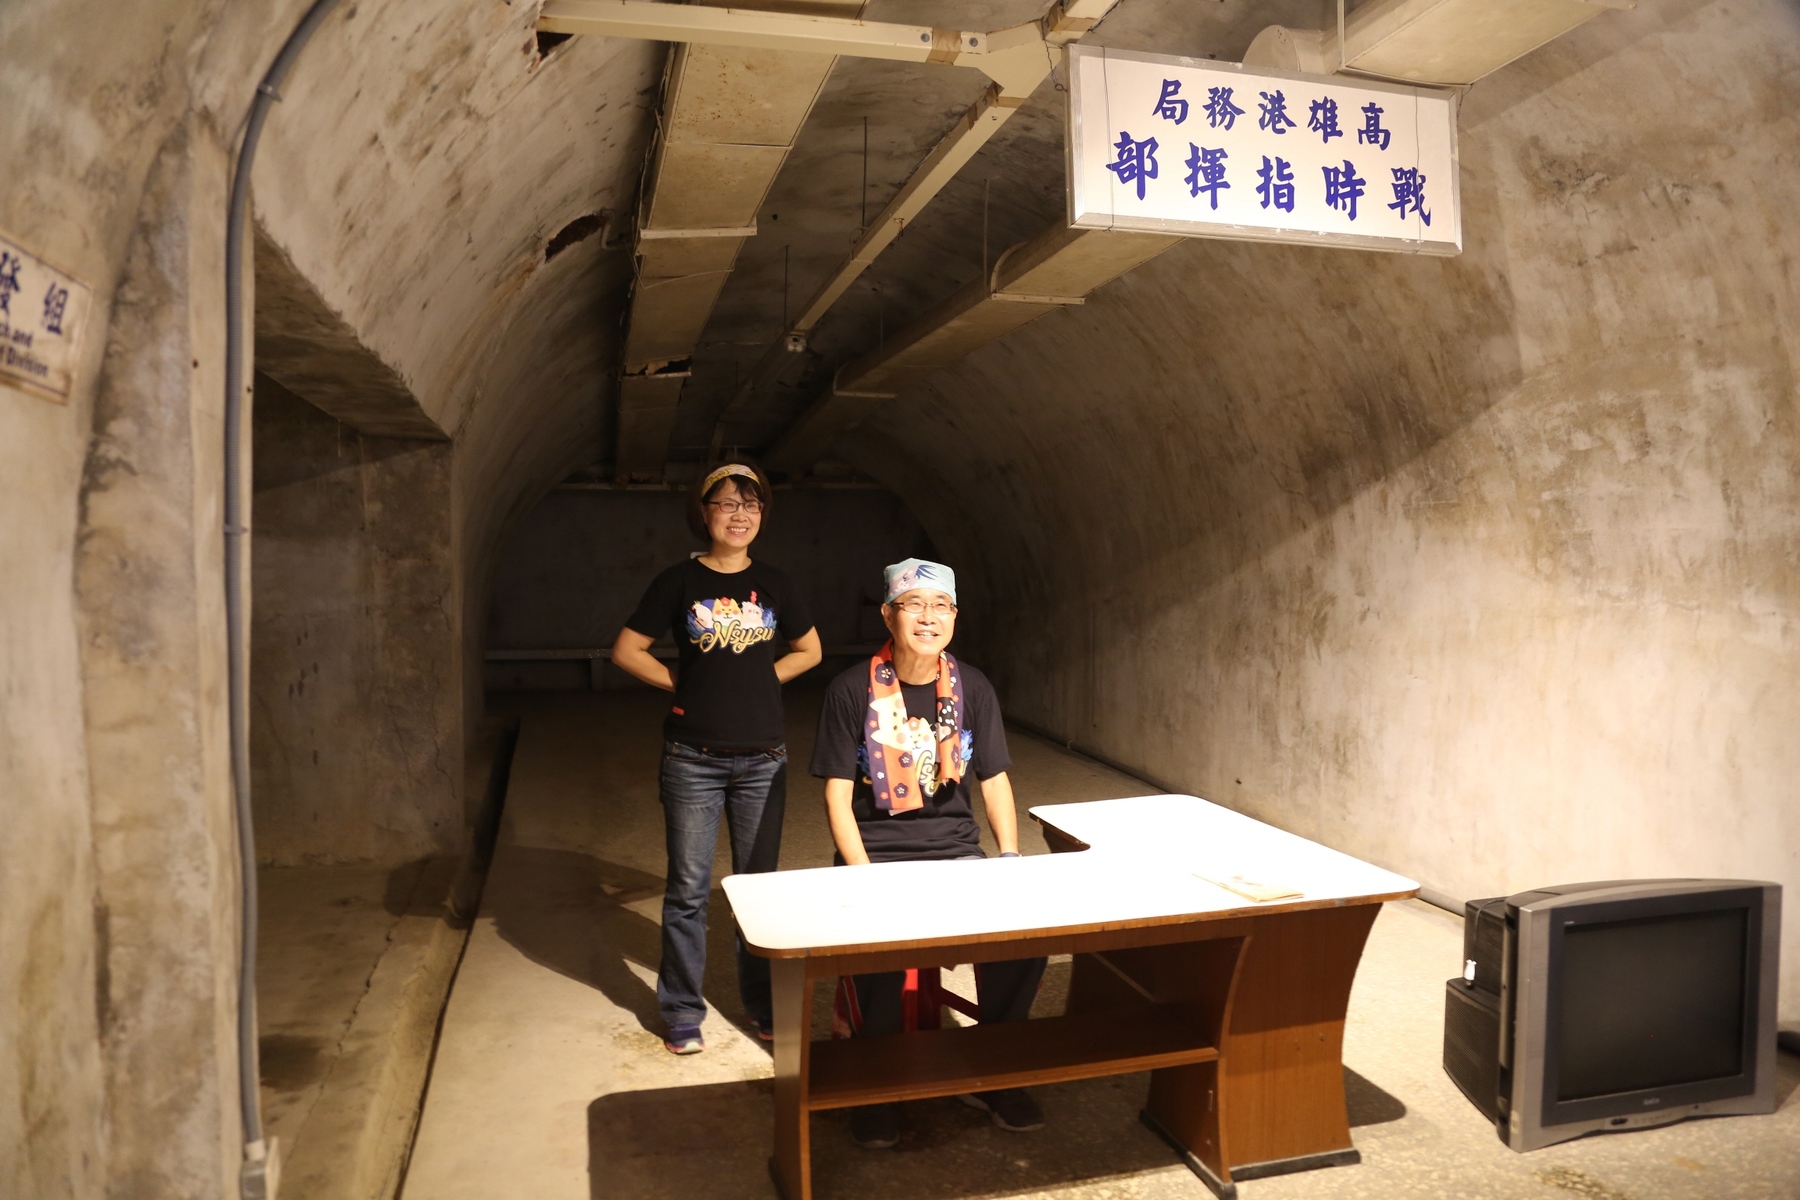 NSYSU President Ying-Yao Cheng (right) and Vice President for Student Affairs Ching Li Yang pose in the tunnel.